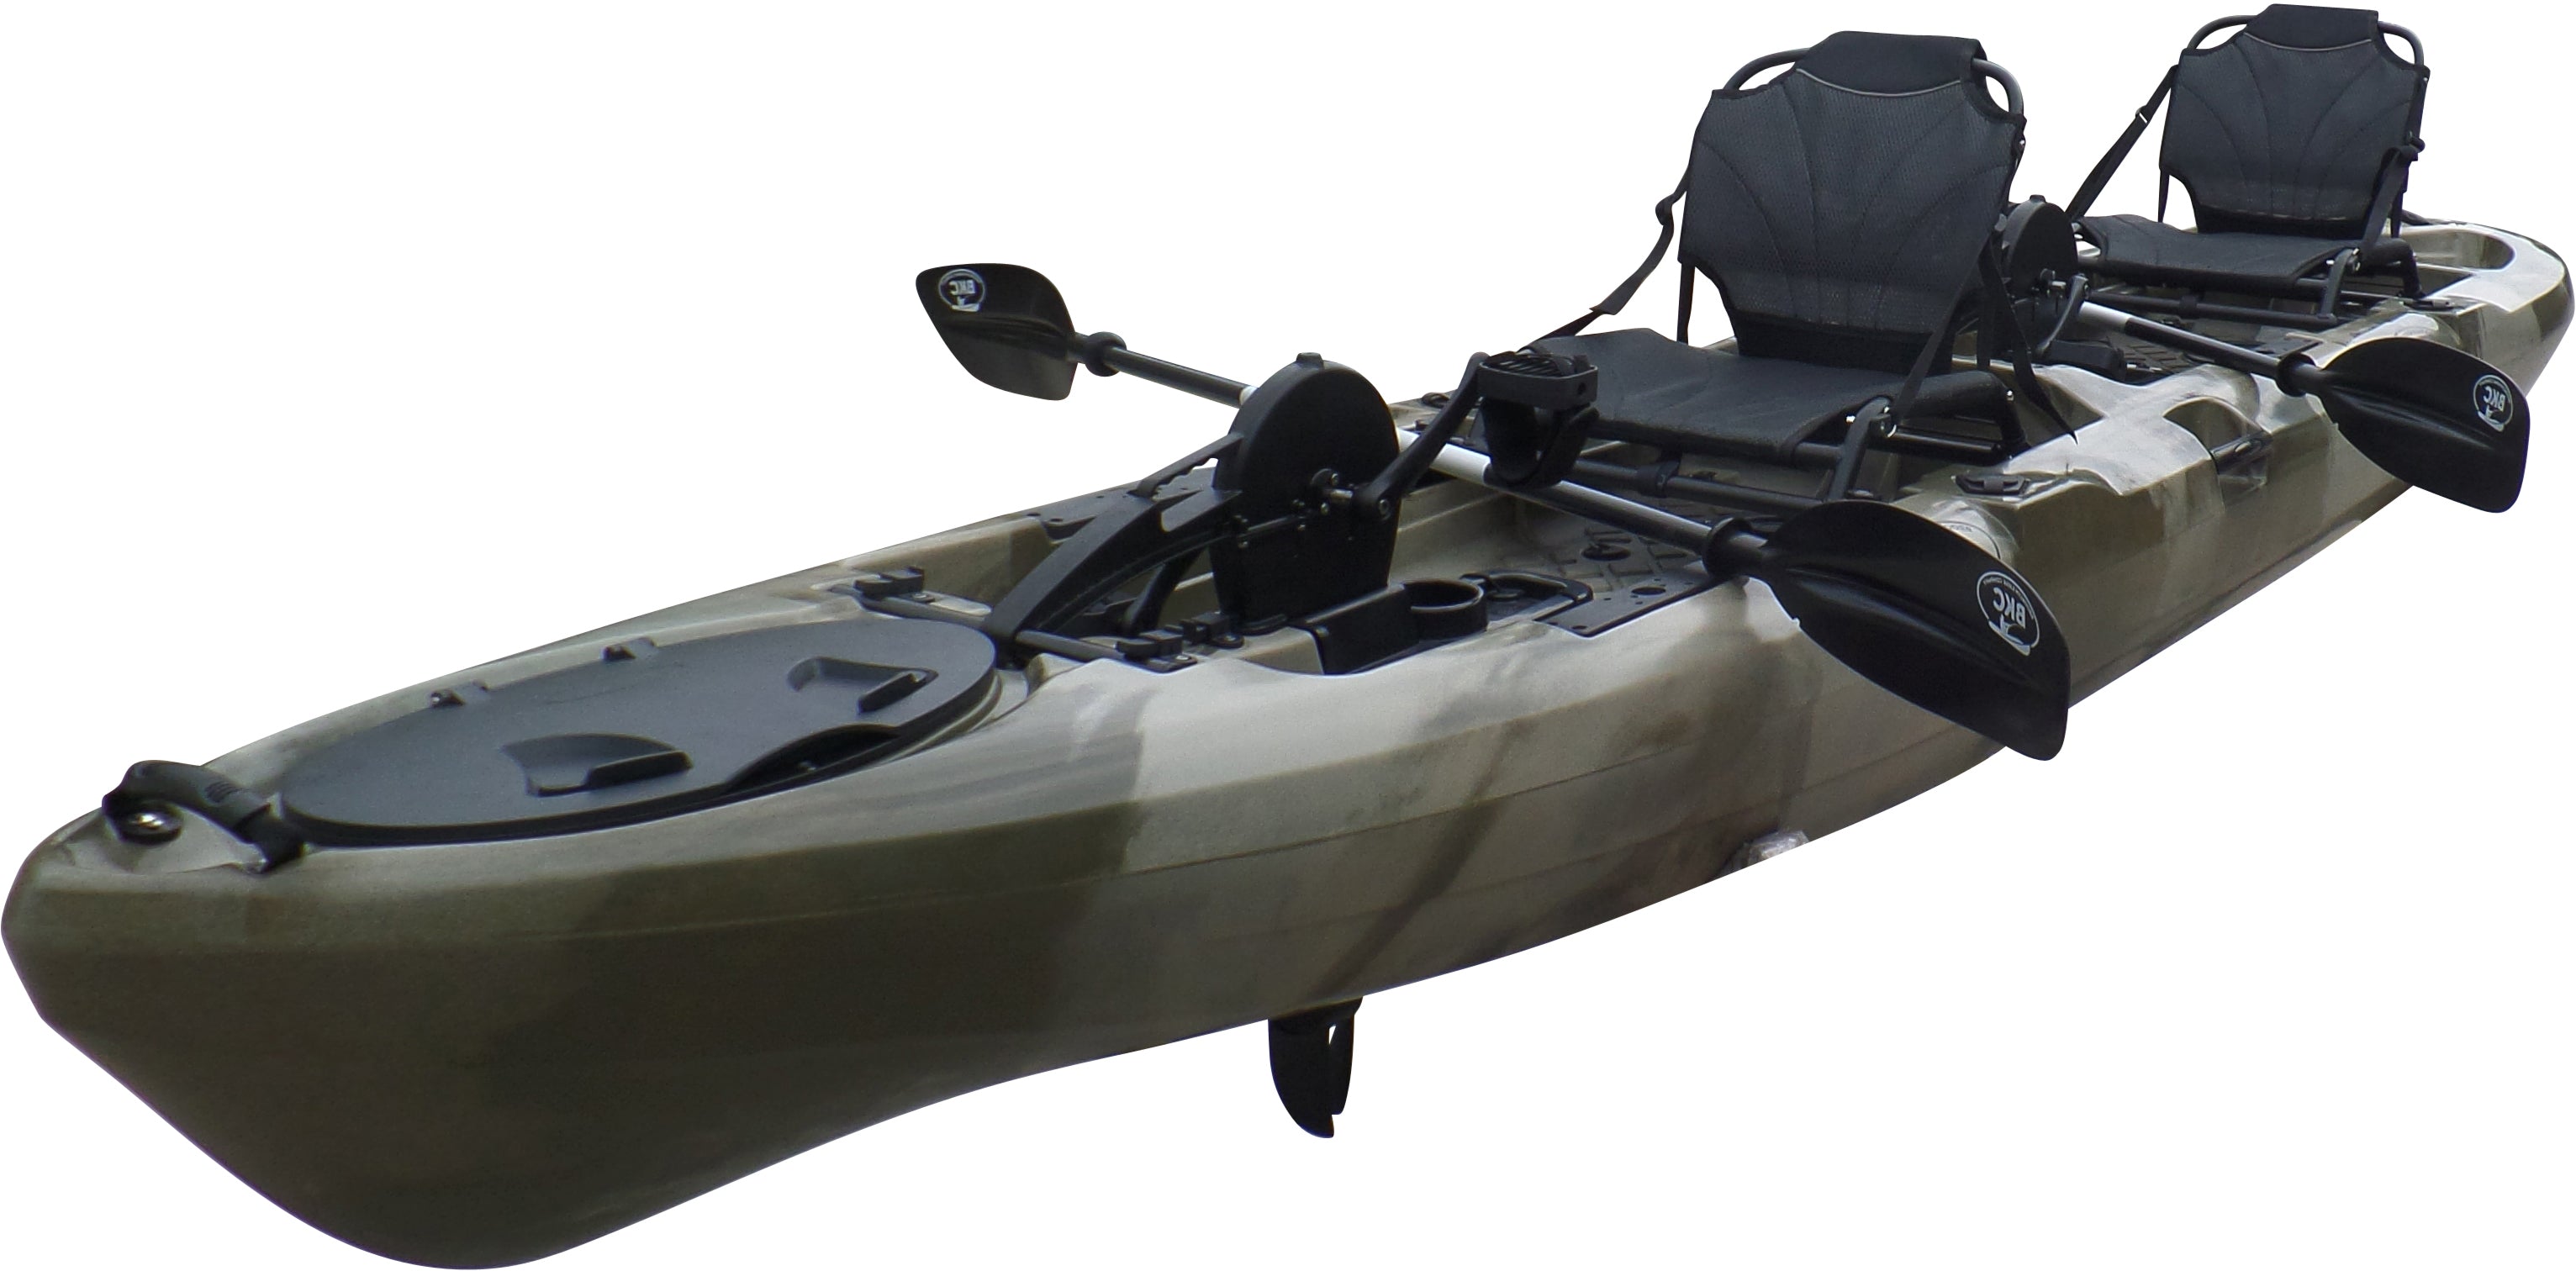 What is a pedal drive kayak